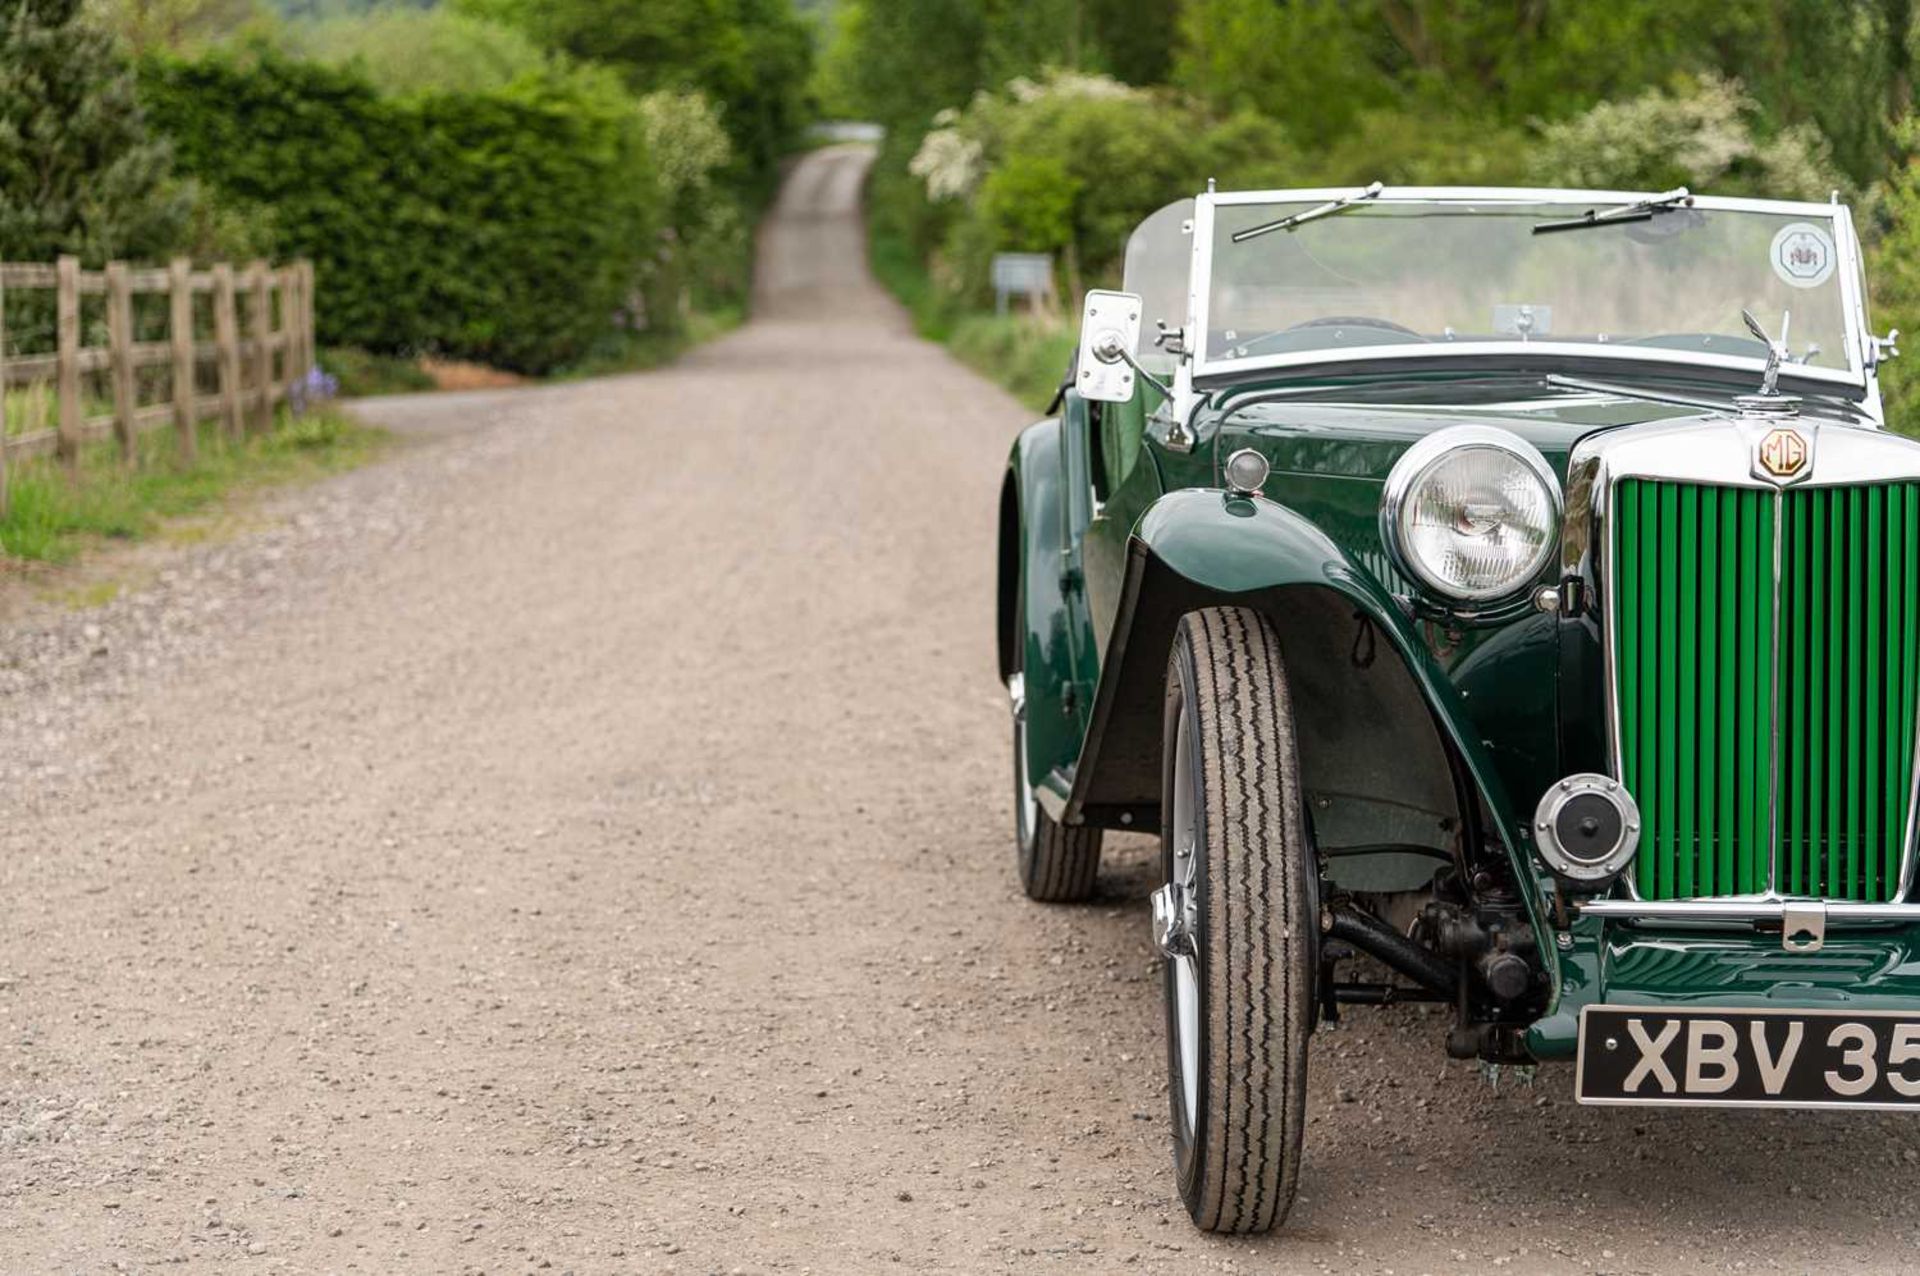 1947 MG TC Midget  Fully restored, right-hand-drive UK home market example - Image 16 of 76